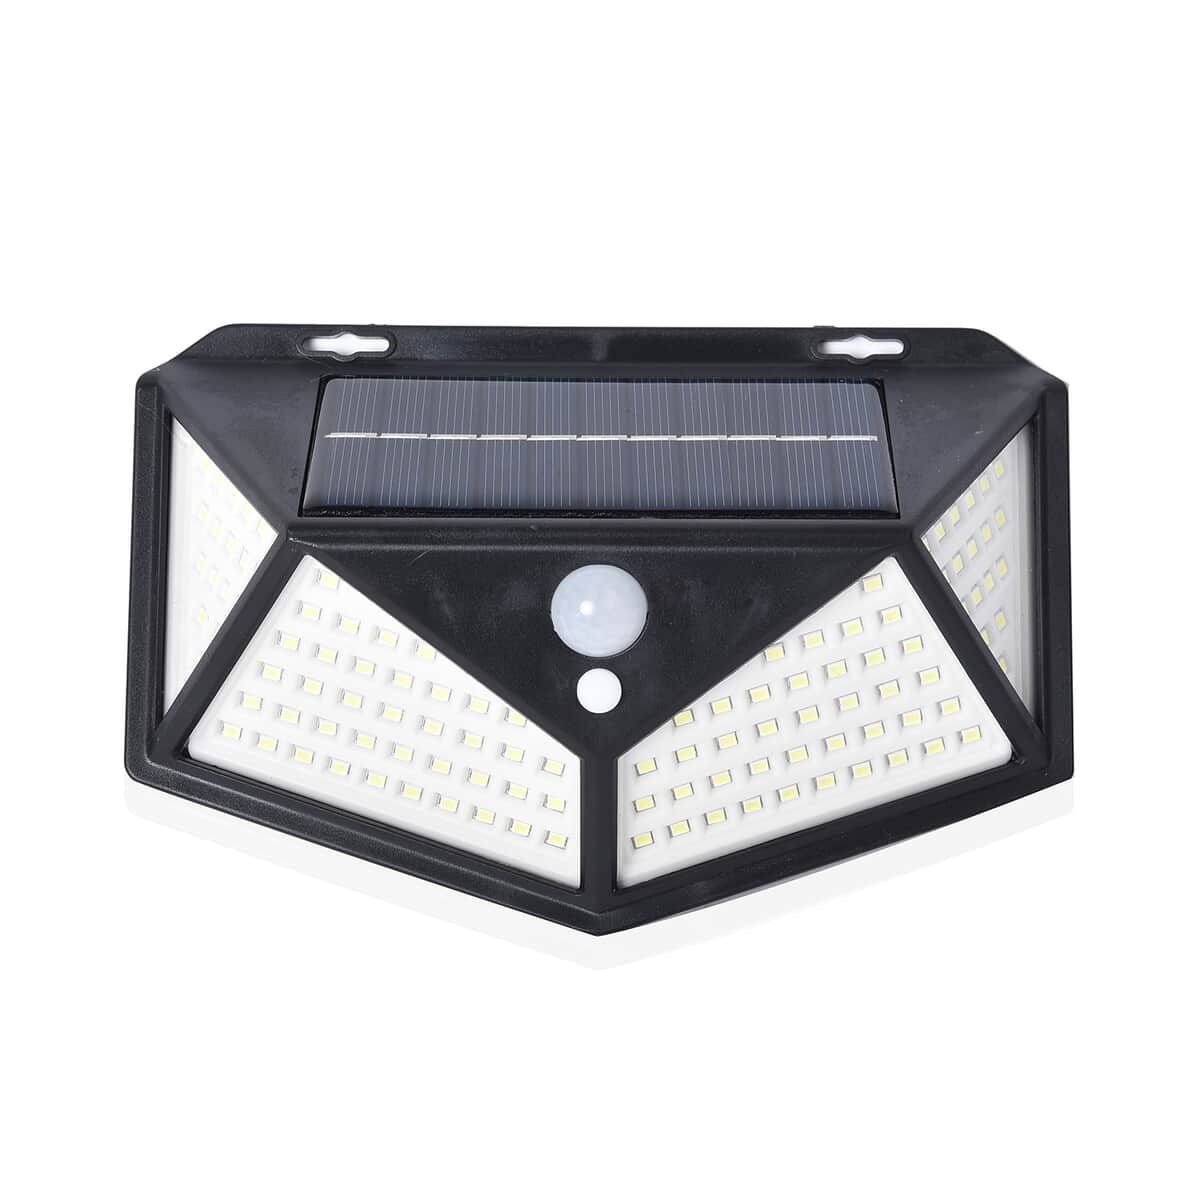 Waterproof Solar Rechargeable Motion Sensor Light with 114 LED Light, 3 Adjustment Modes and 270° Wide Angle image number 0